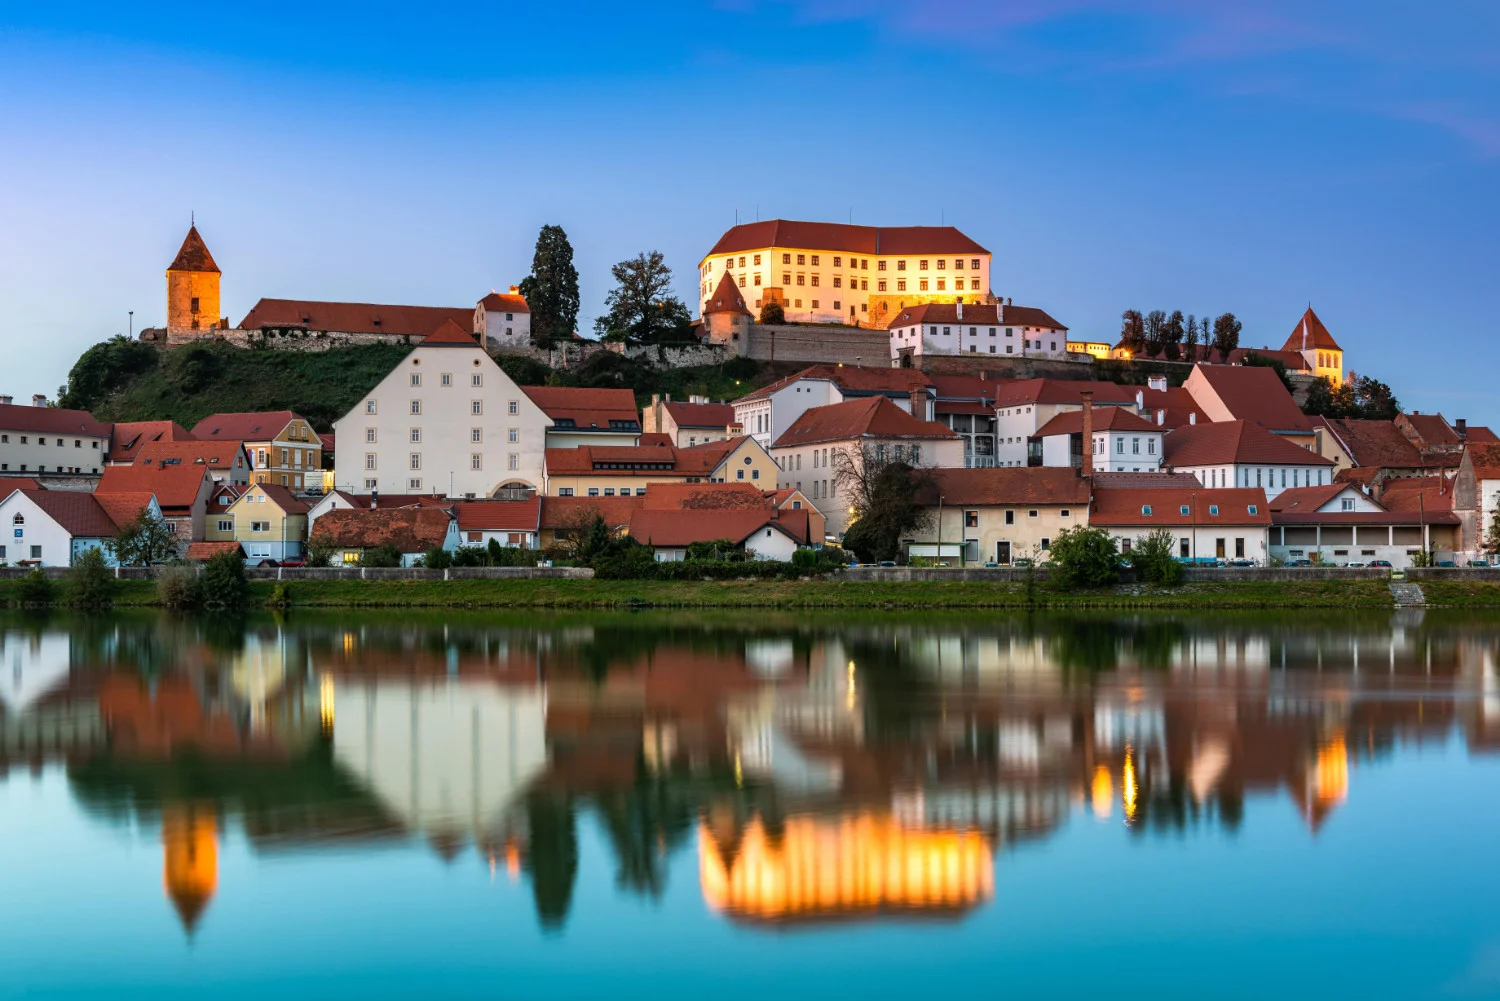  Ptuj is said to be one of the oldest towns in the country.